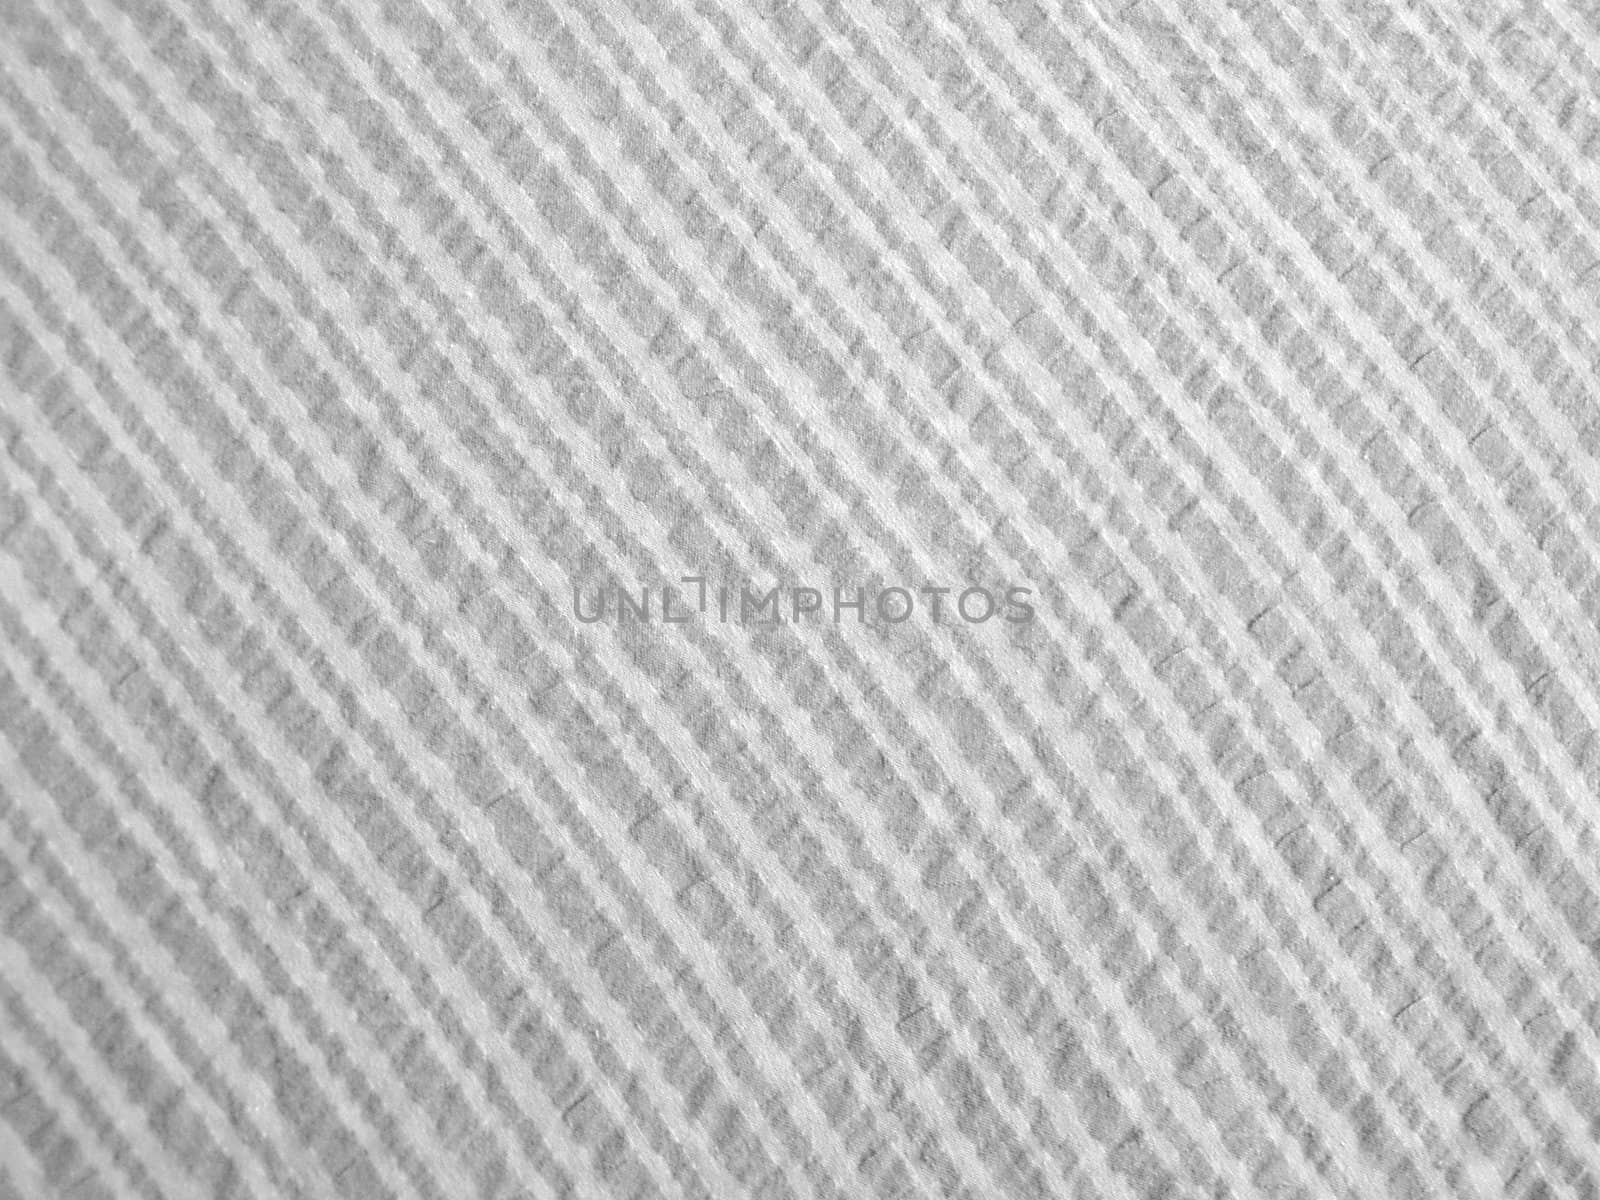 Seersucker cotton fabric. Retro style background with a fine woven structure.